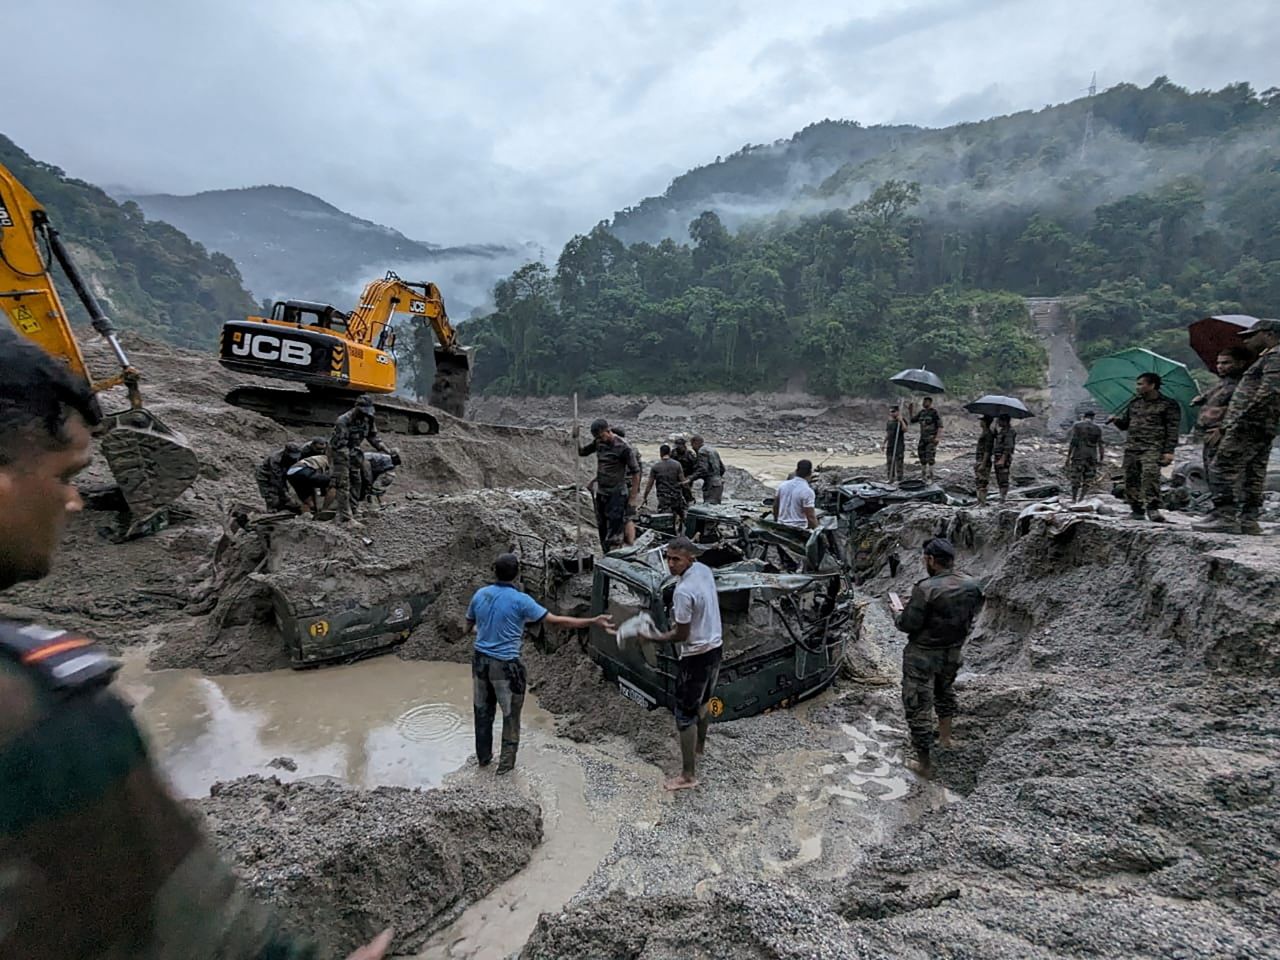 Members of the Indian Army try to recover trucks that were buried at a flood-affected area in the state of Sikkim. Heavy rain caused a glacial lake to burst, <a href="https://www.cnn.com/2023/10/05/india/india-sikkim-floods-search-damage-climate-intl-hnk/index.html" target="_blank">leading to flash floods</a> that killed at least 14 people and washed away roads and bridges, according to the state government. This undated photo was released by the Indian Army on Thursday, October 5.